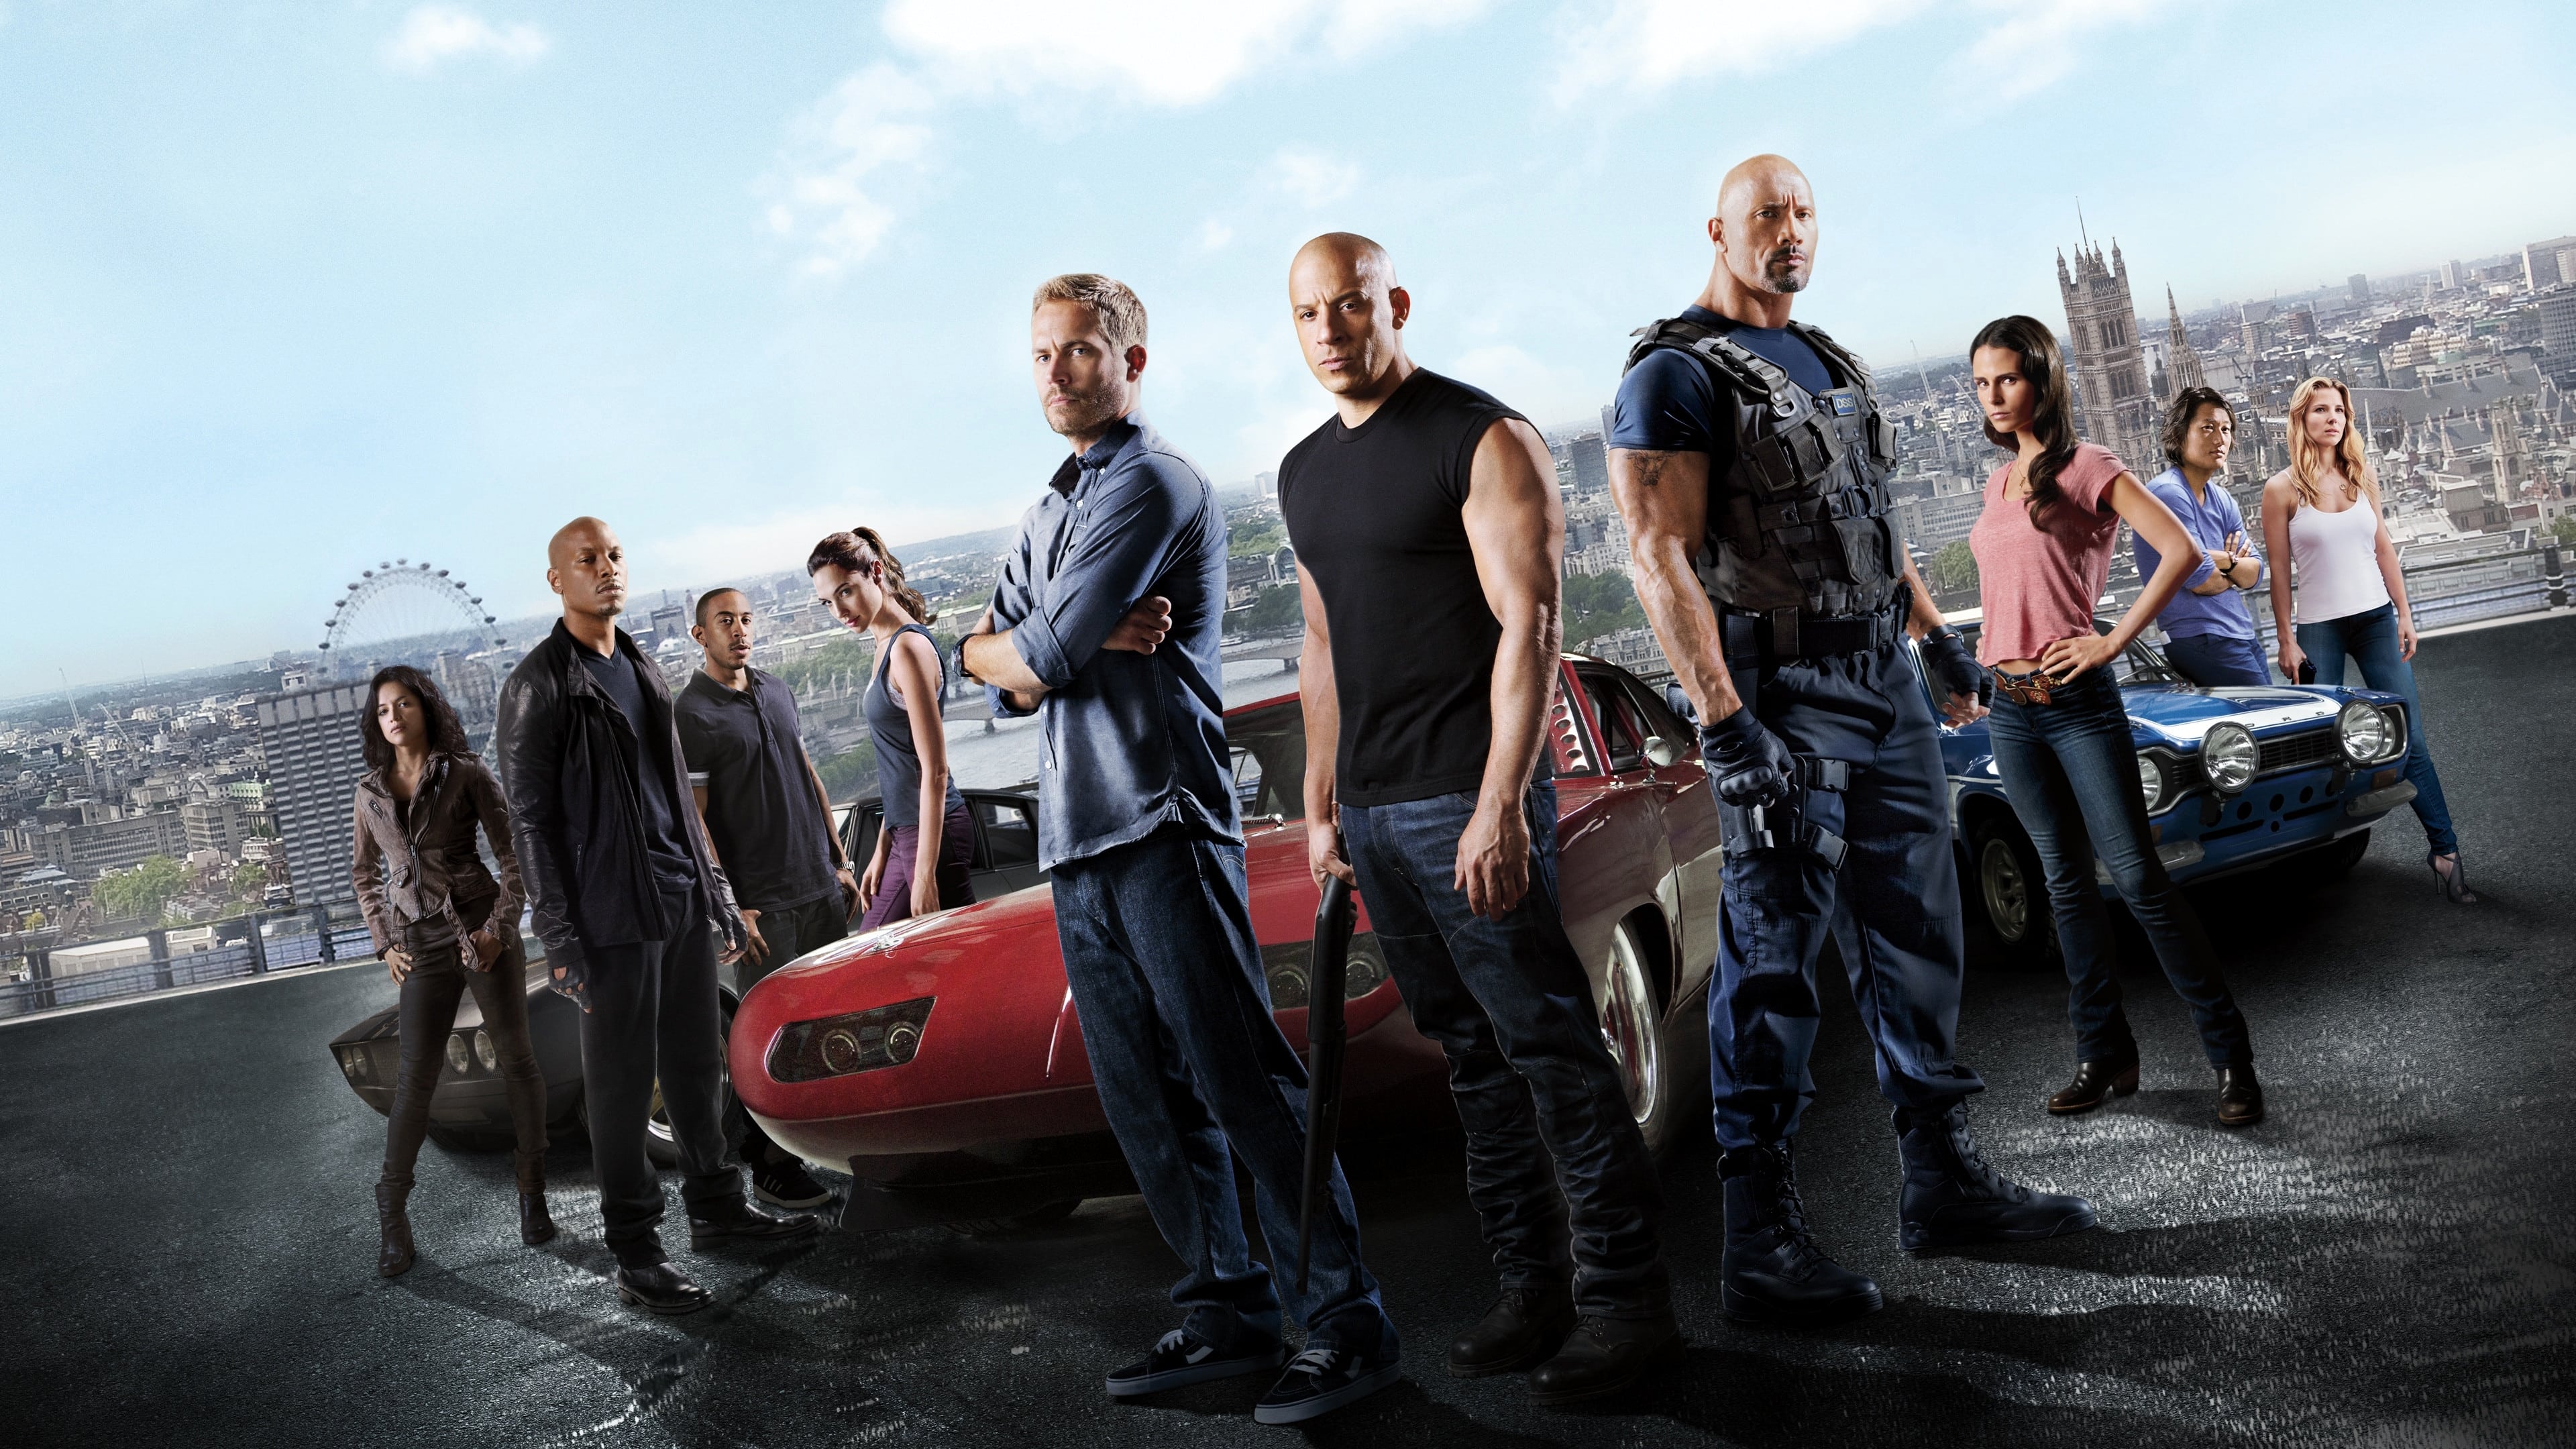 The Fast and Furious 6